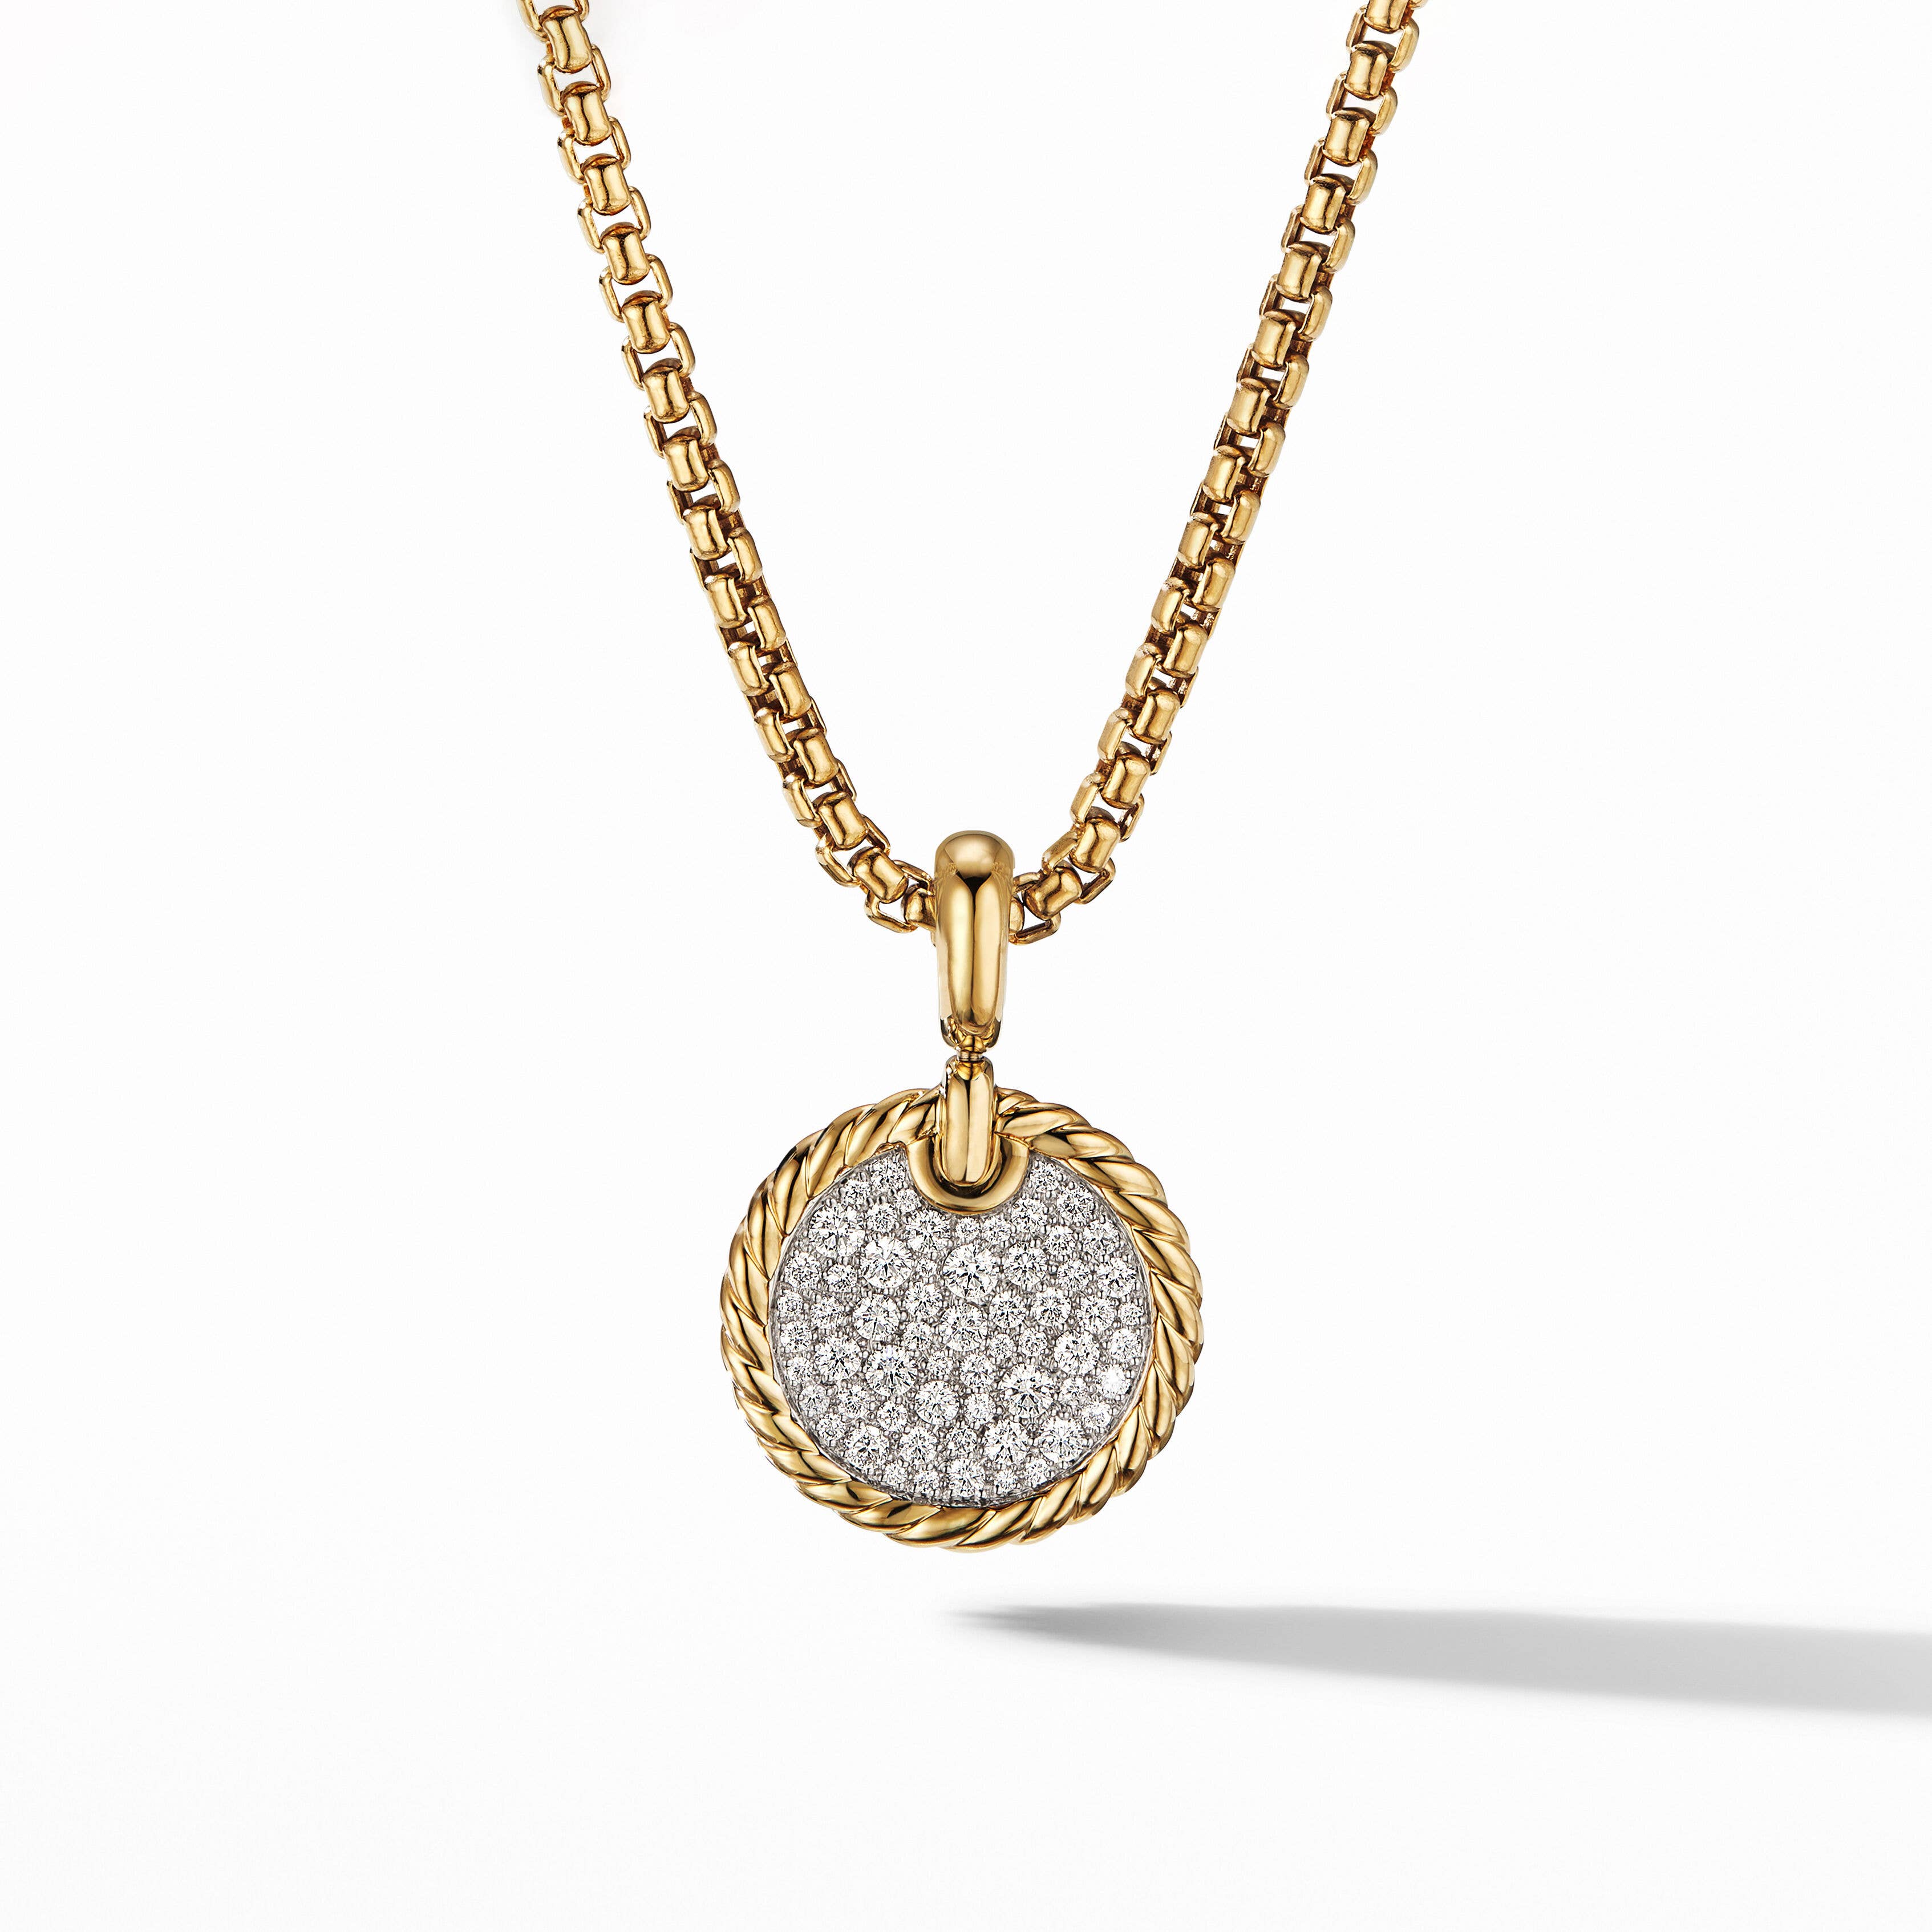 DY Elements® Disc Pendant in 18K Yellow Gold with Pavé Diamonds